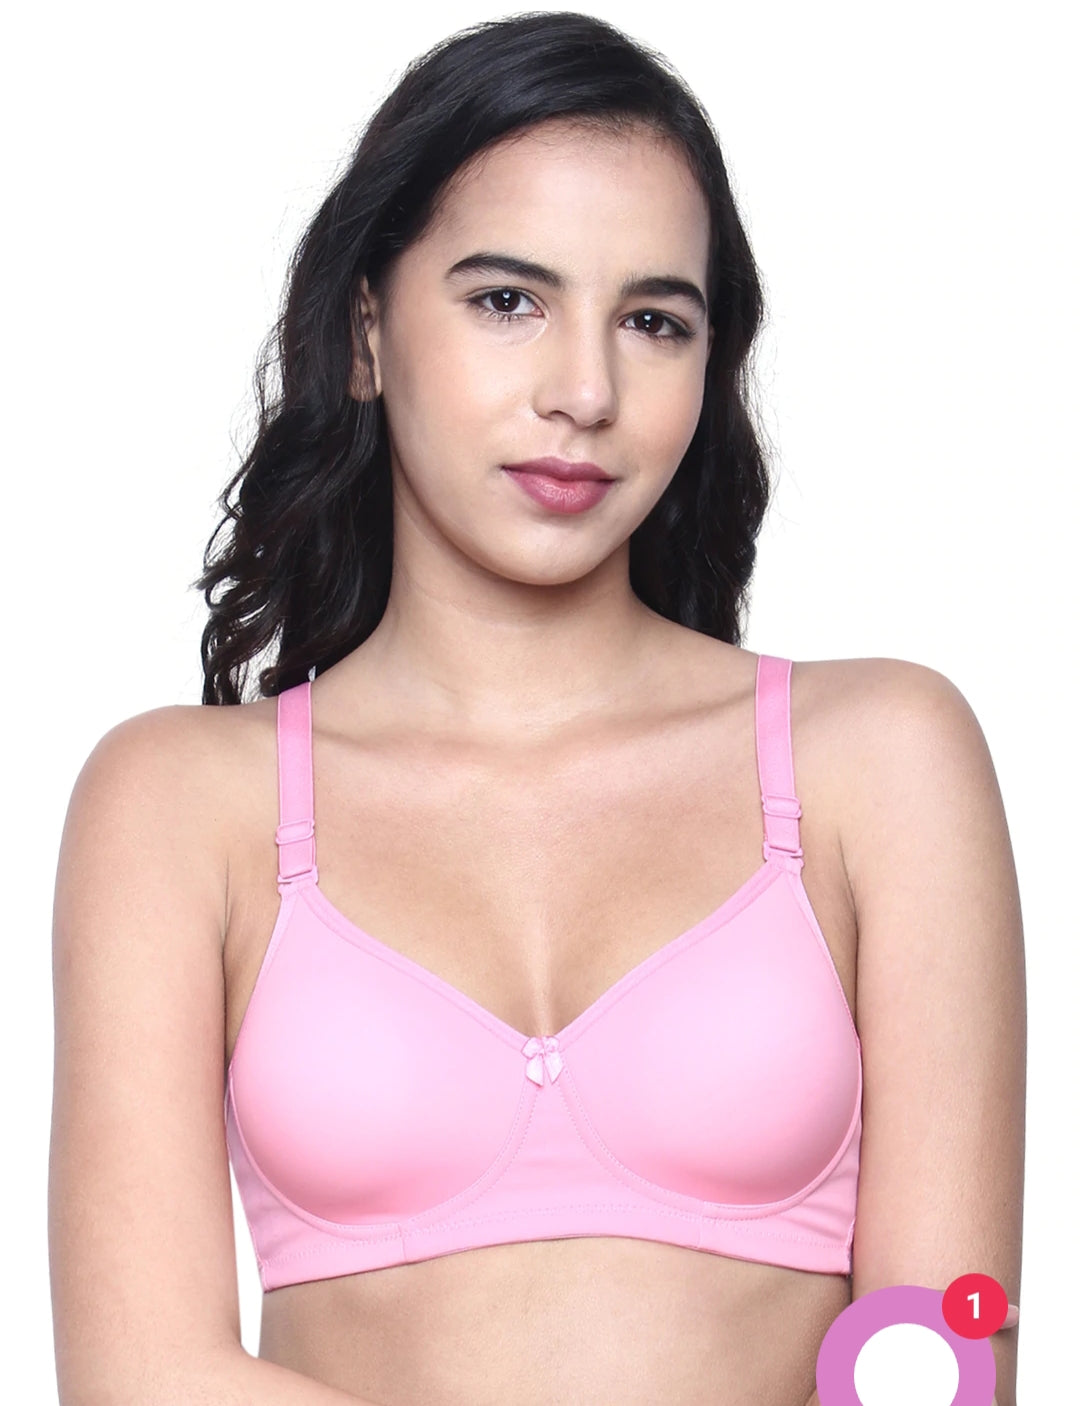 Buy Juliet Mold Padded Non Wired Plain Nylon Spandex Support Bra